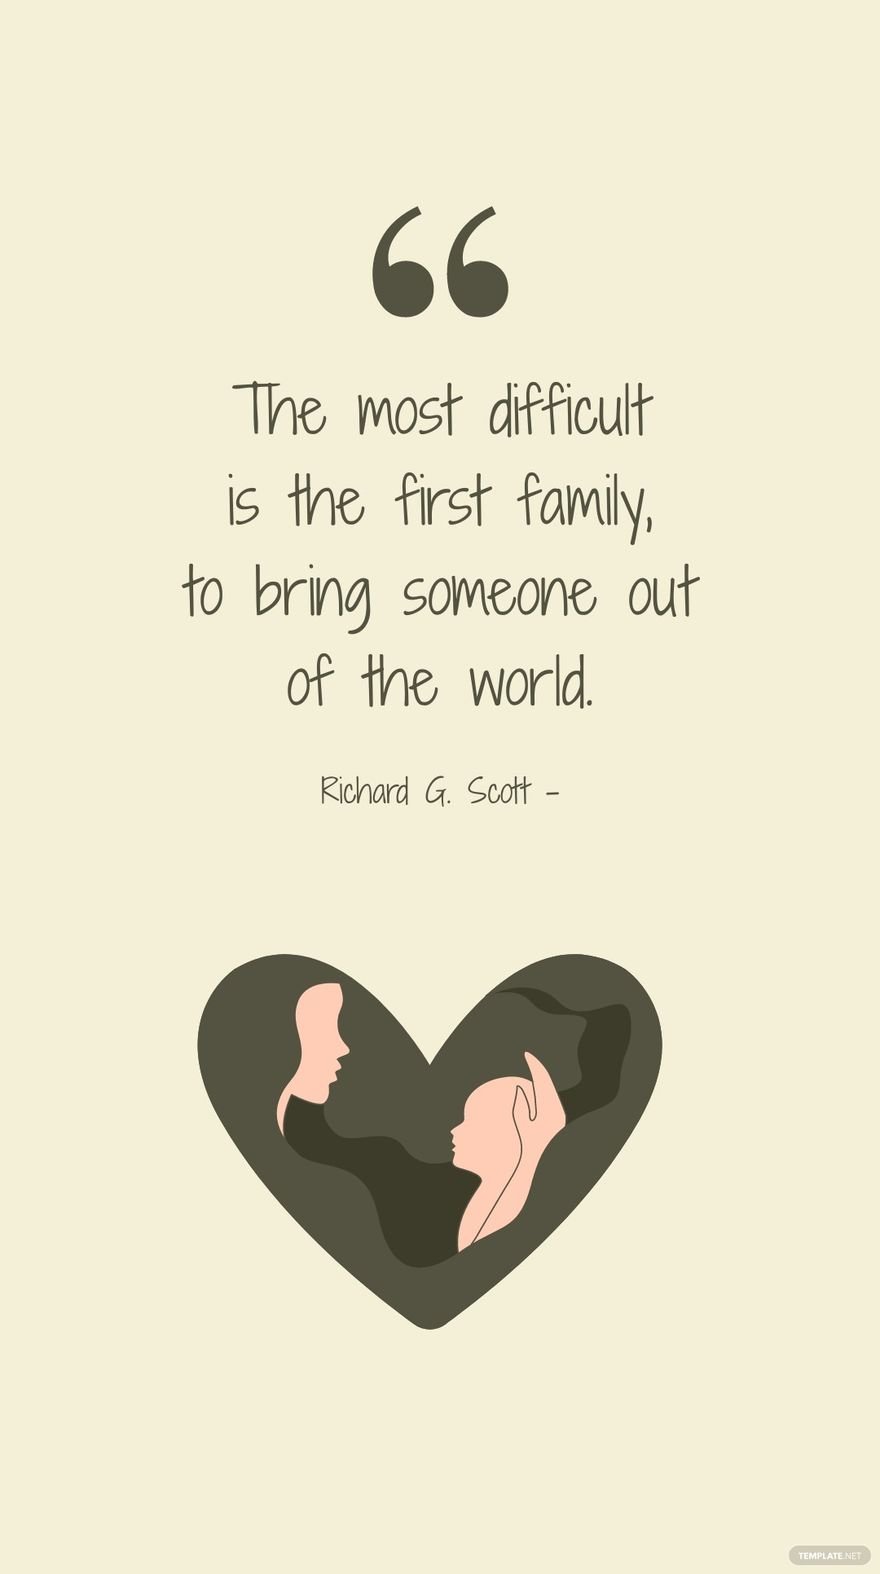 Richard G. Scott - The most difficult is the first family, to bring someone out of the world.